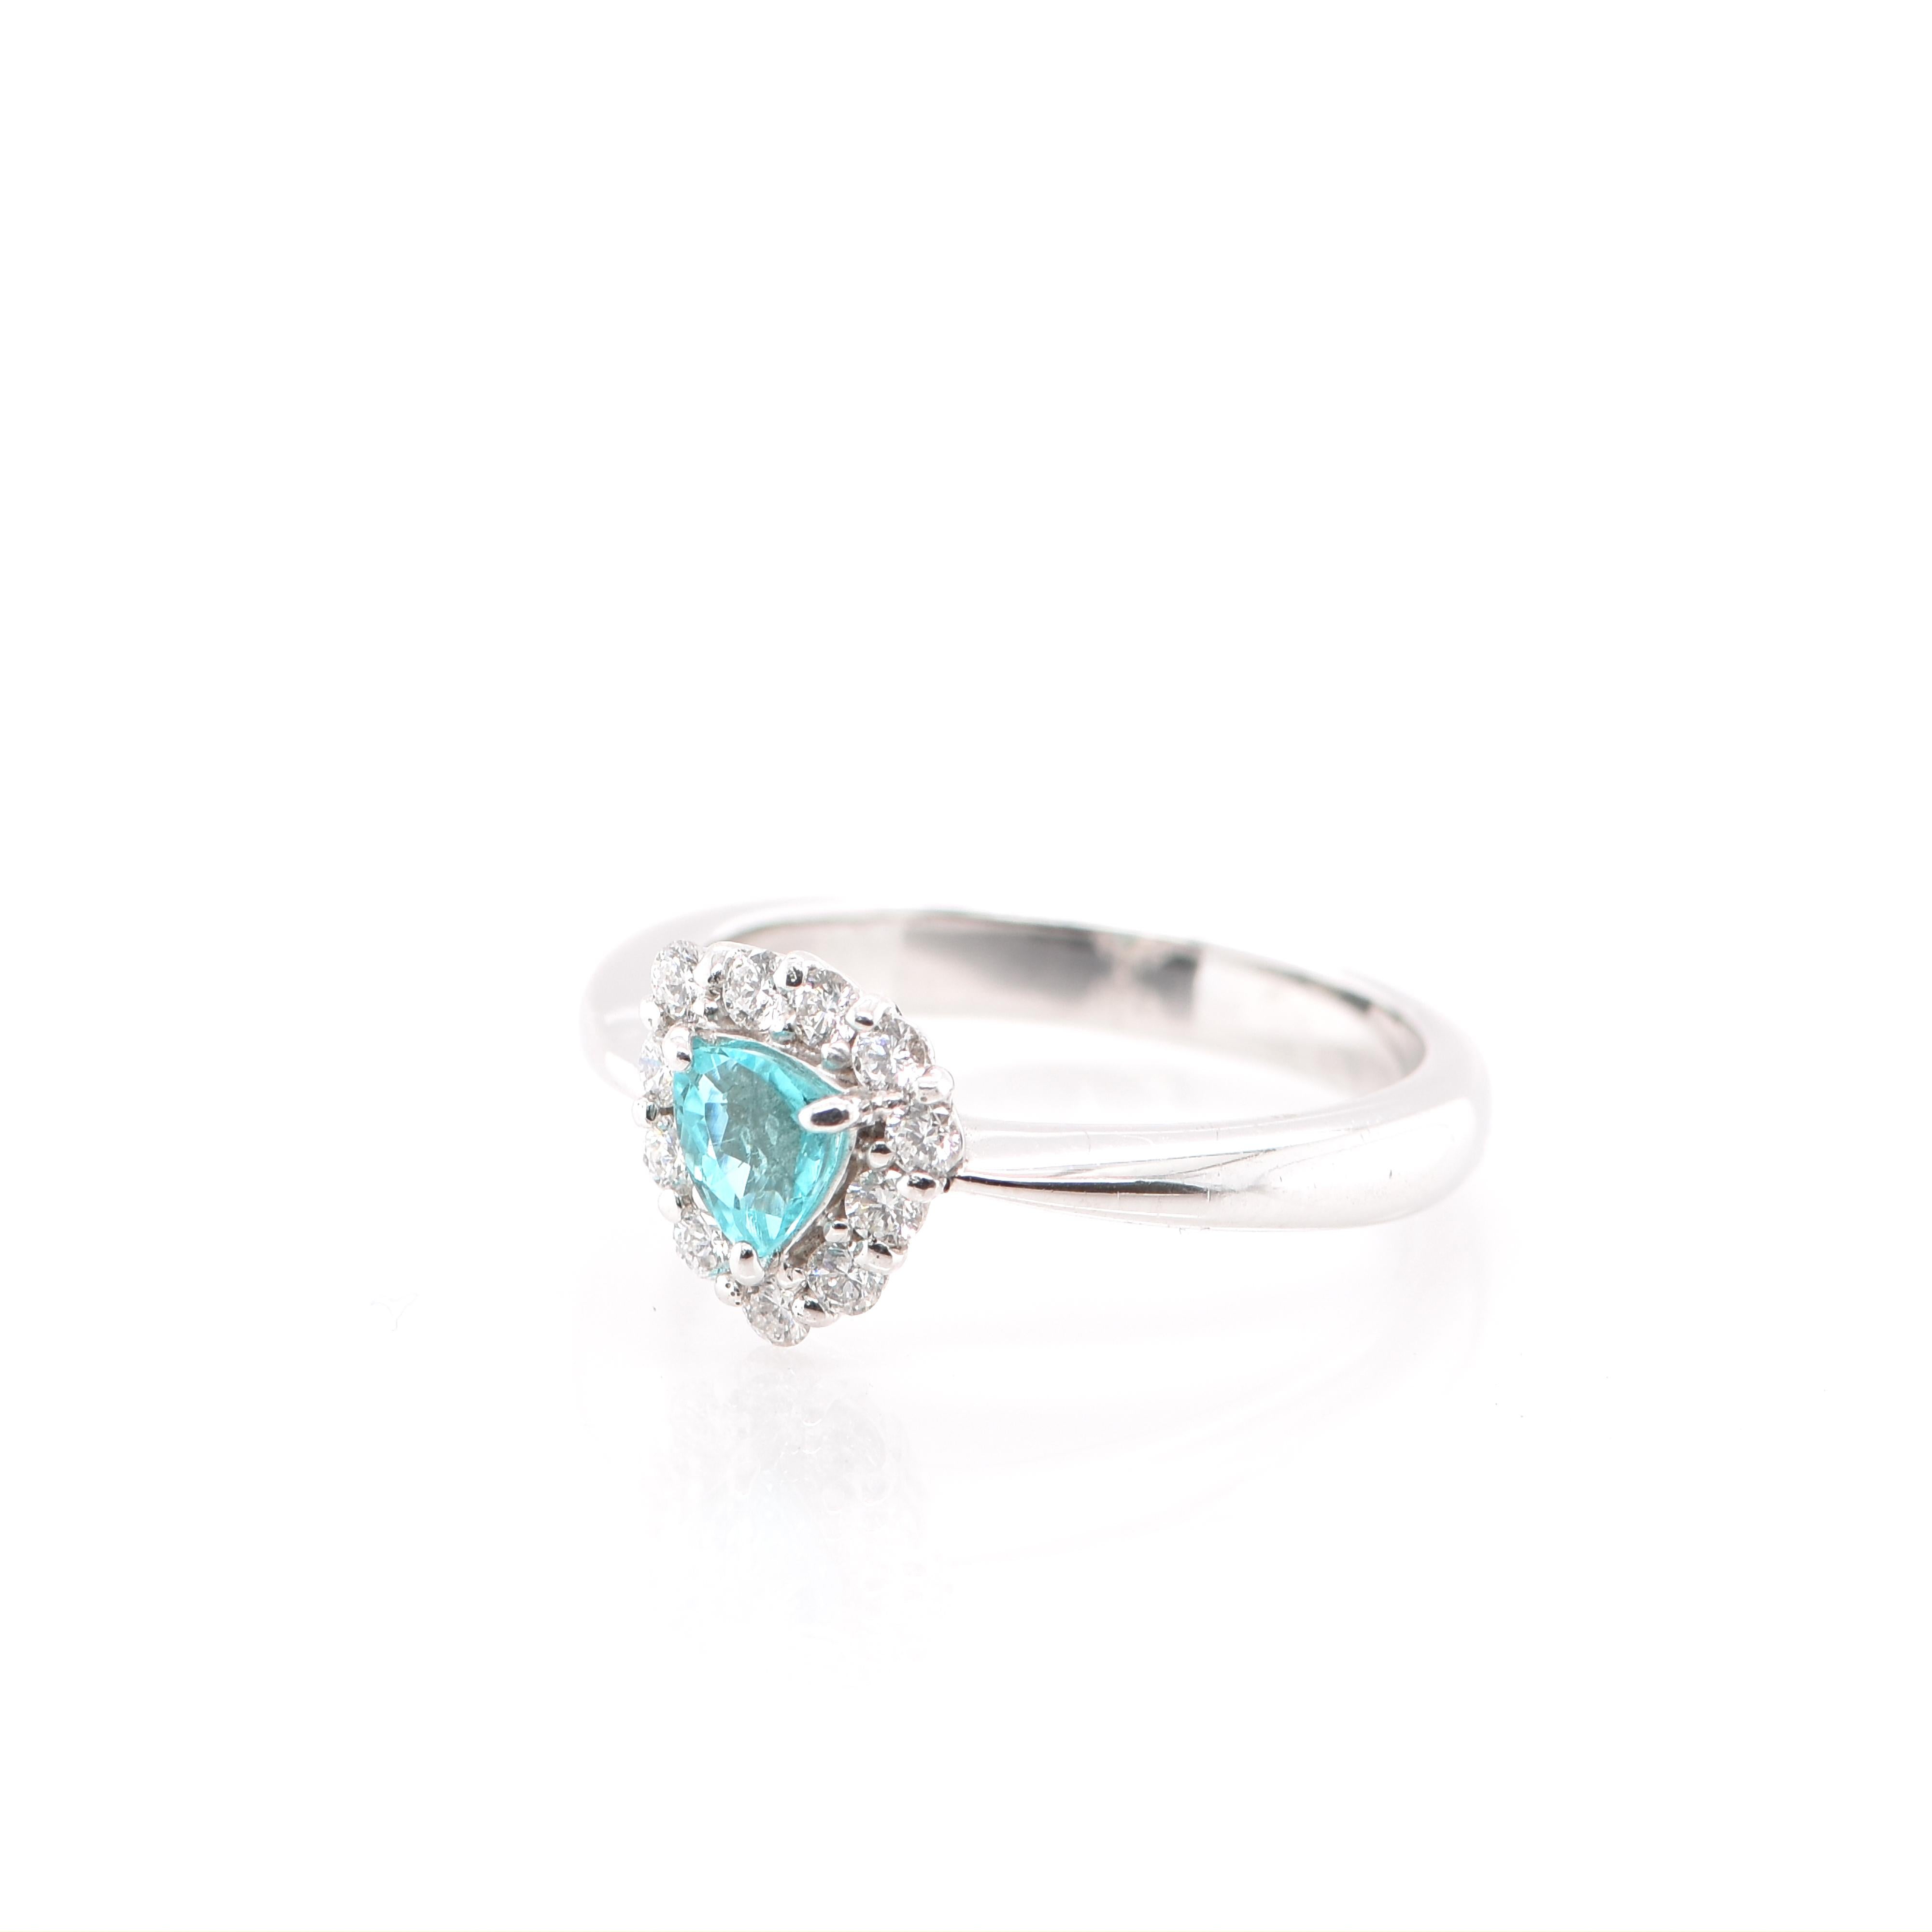 A beautiful and elegant ring featuring a GIA Certified 0.32 Carat Trillion Cut Paraiba Tourmaline and 0.25 Carats of Diamond Accents set in Platinum. Paraiba Tourmalines were only discovered 30 years ago in the Brazilian state of the same name-